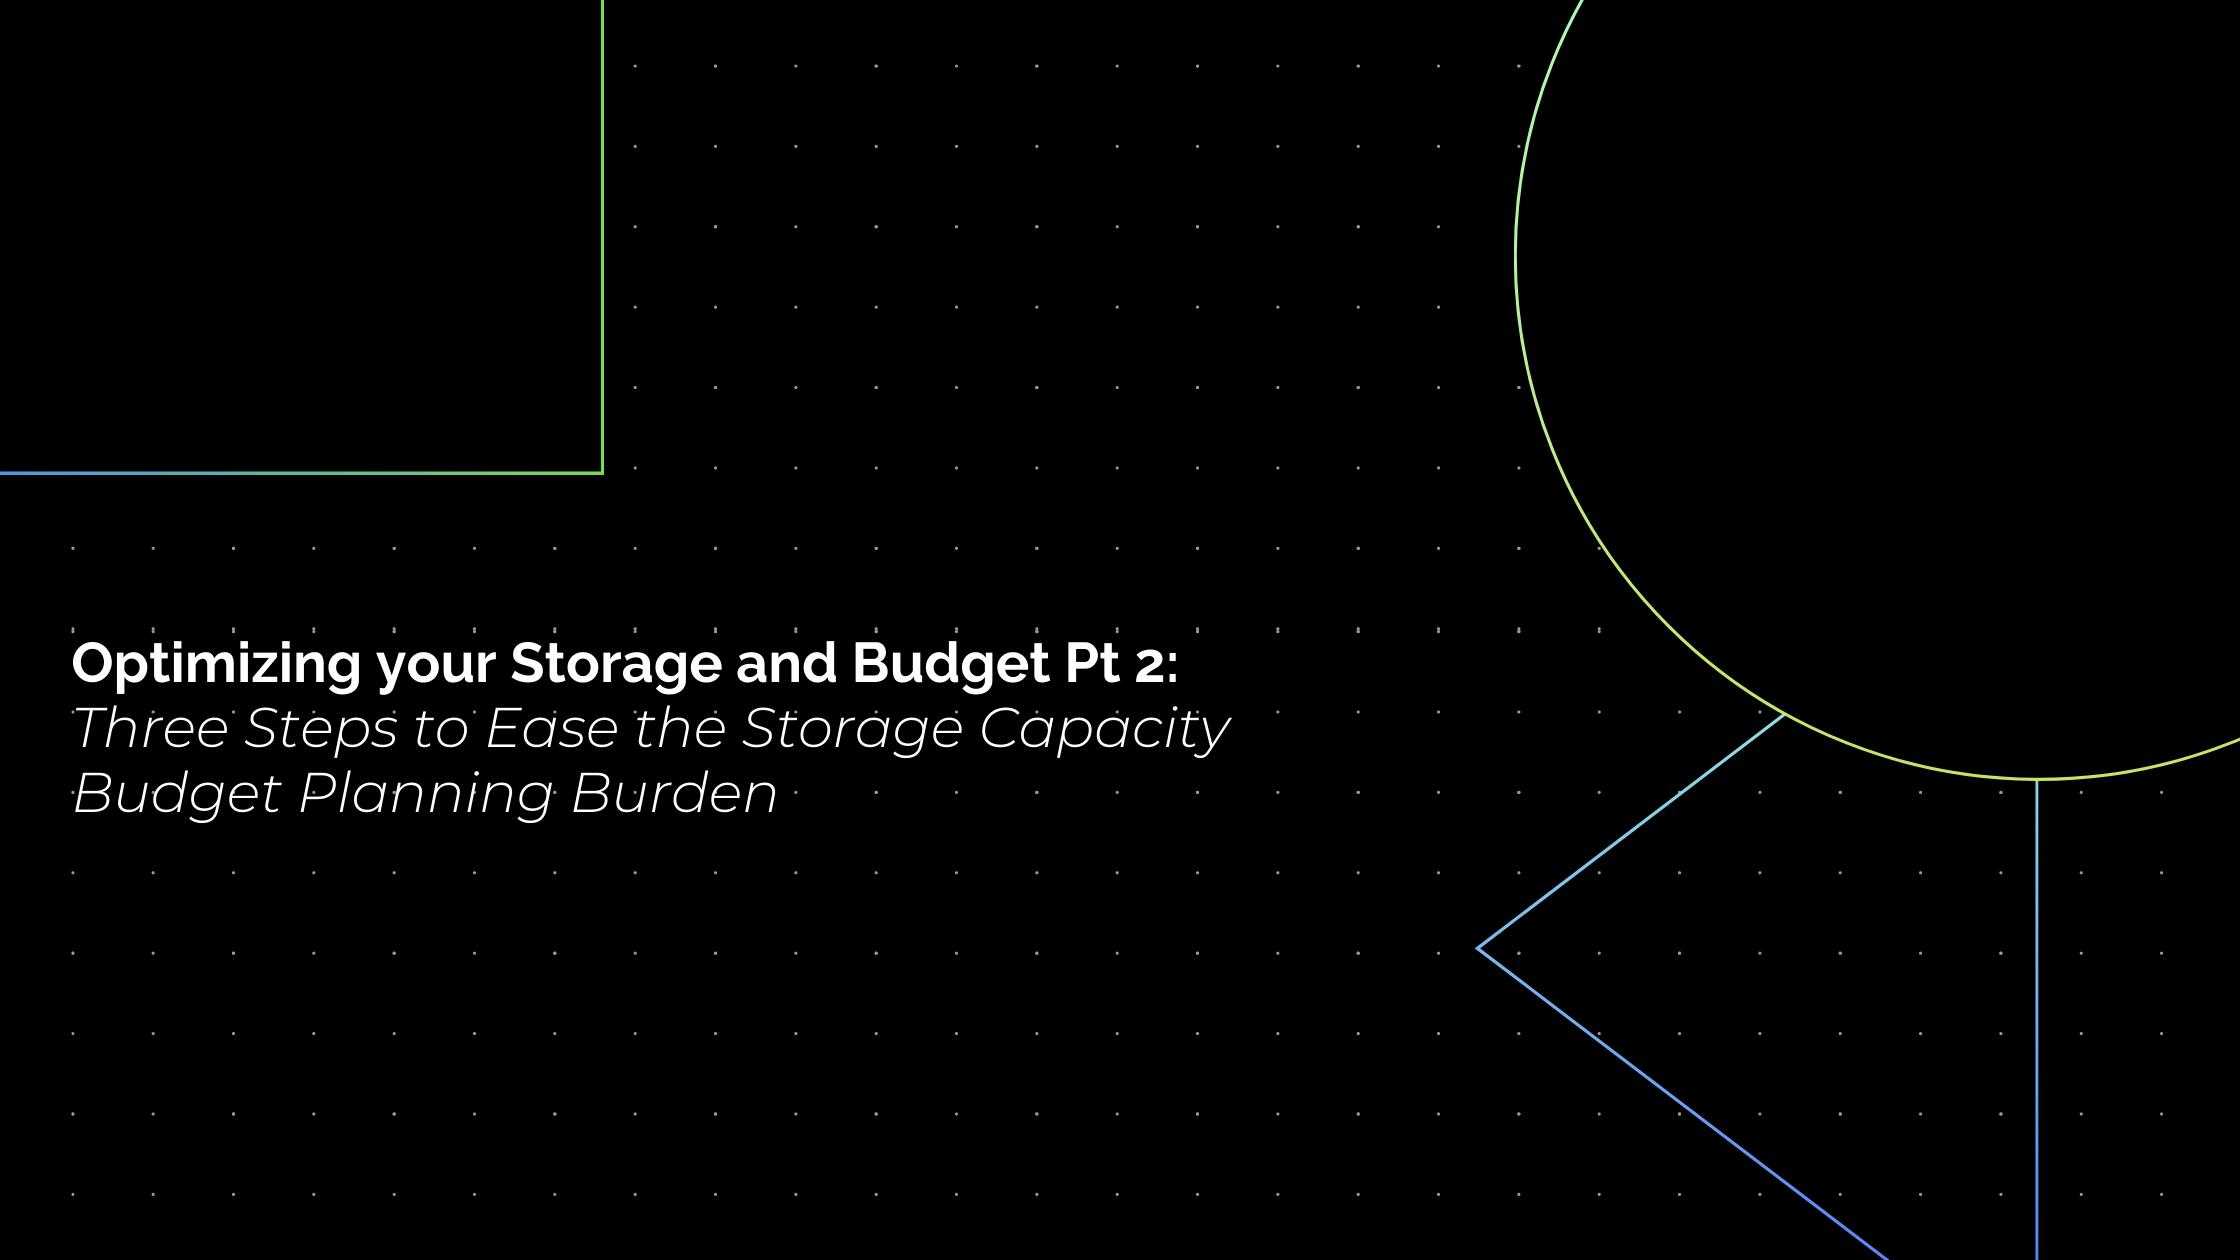 Optimizing your Storage and Budget Pt 2: Three Steps to Ease the Storage Capacity Budget Planning Burden